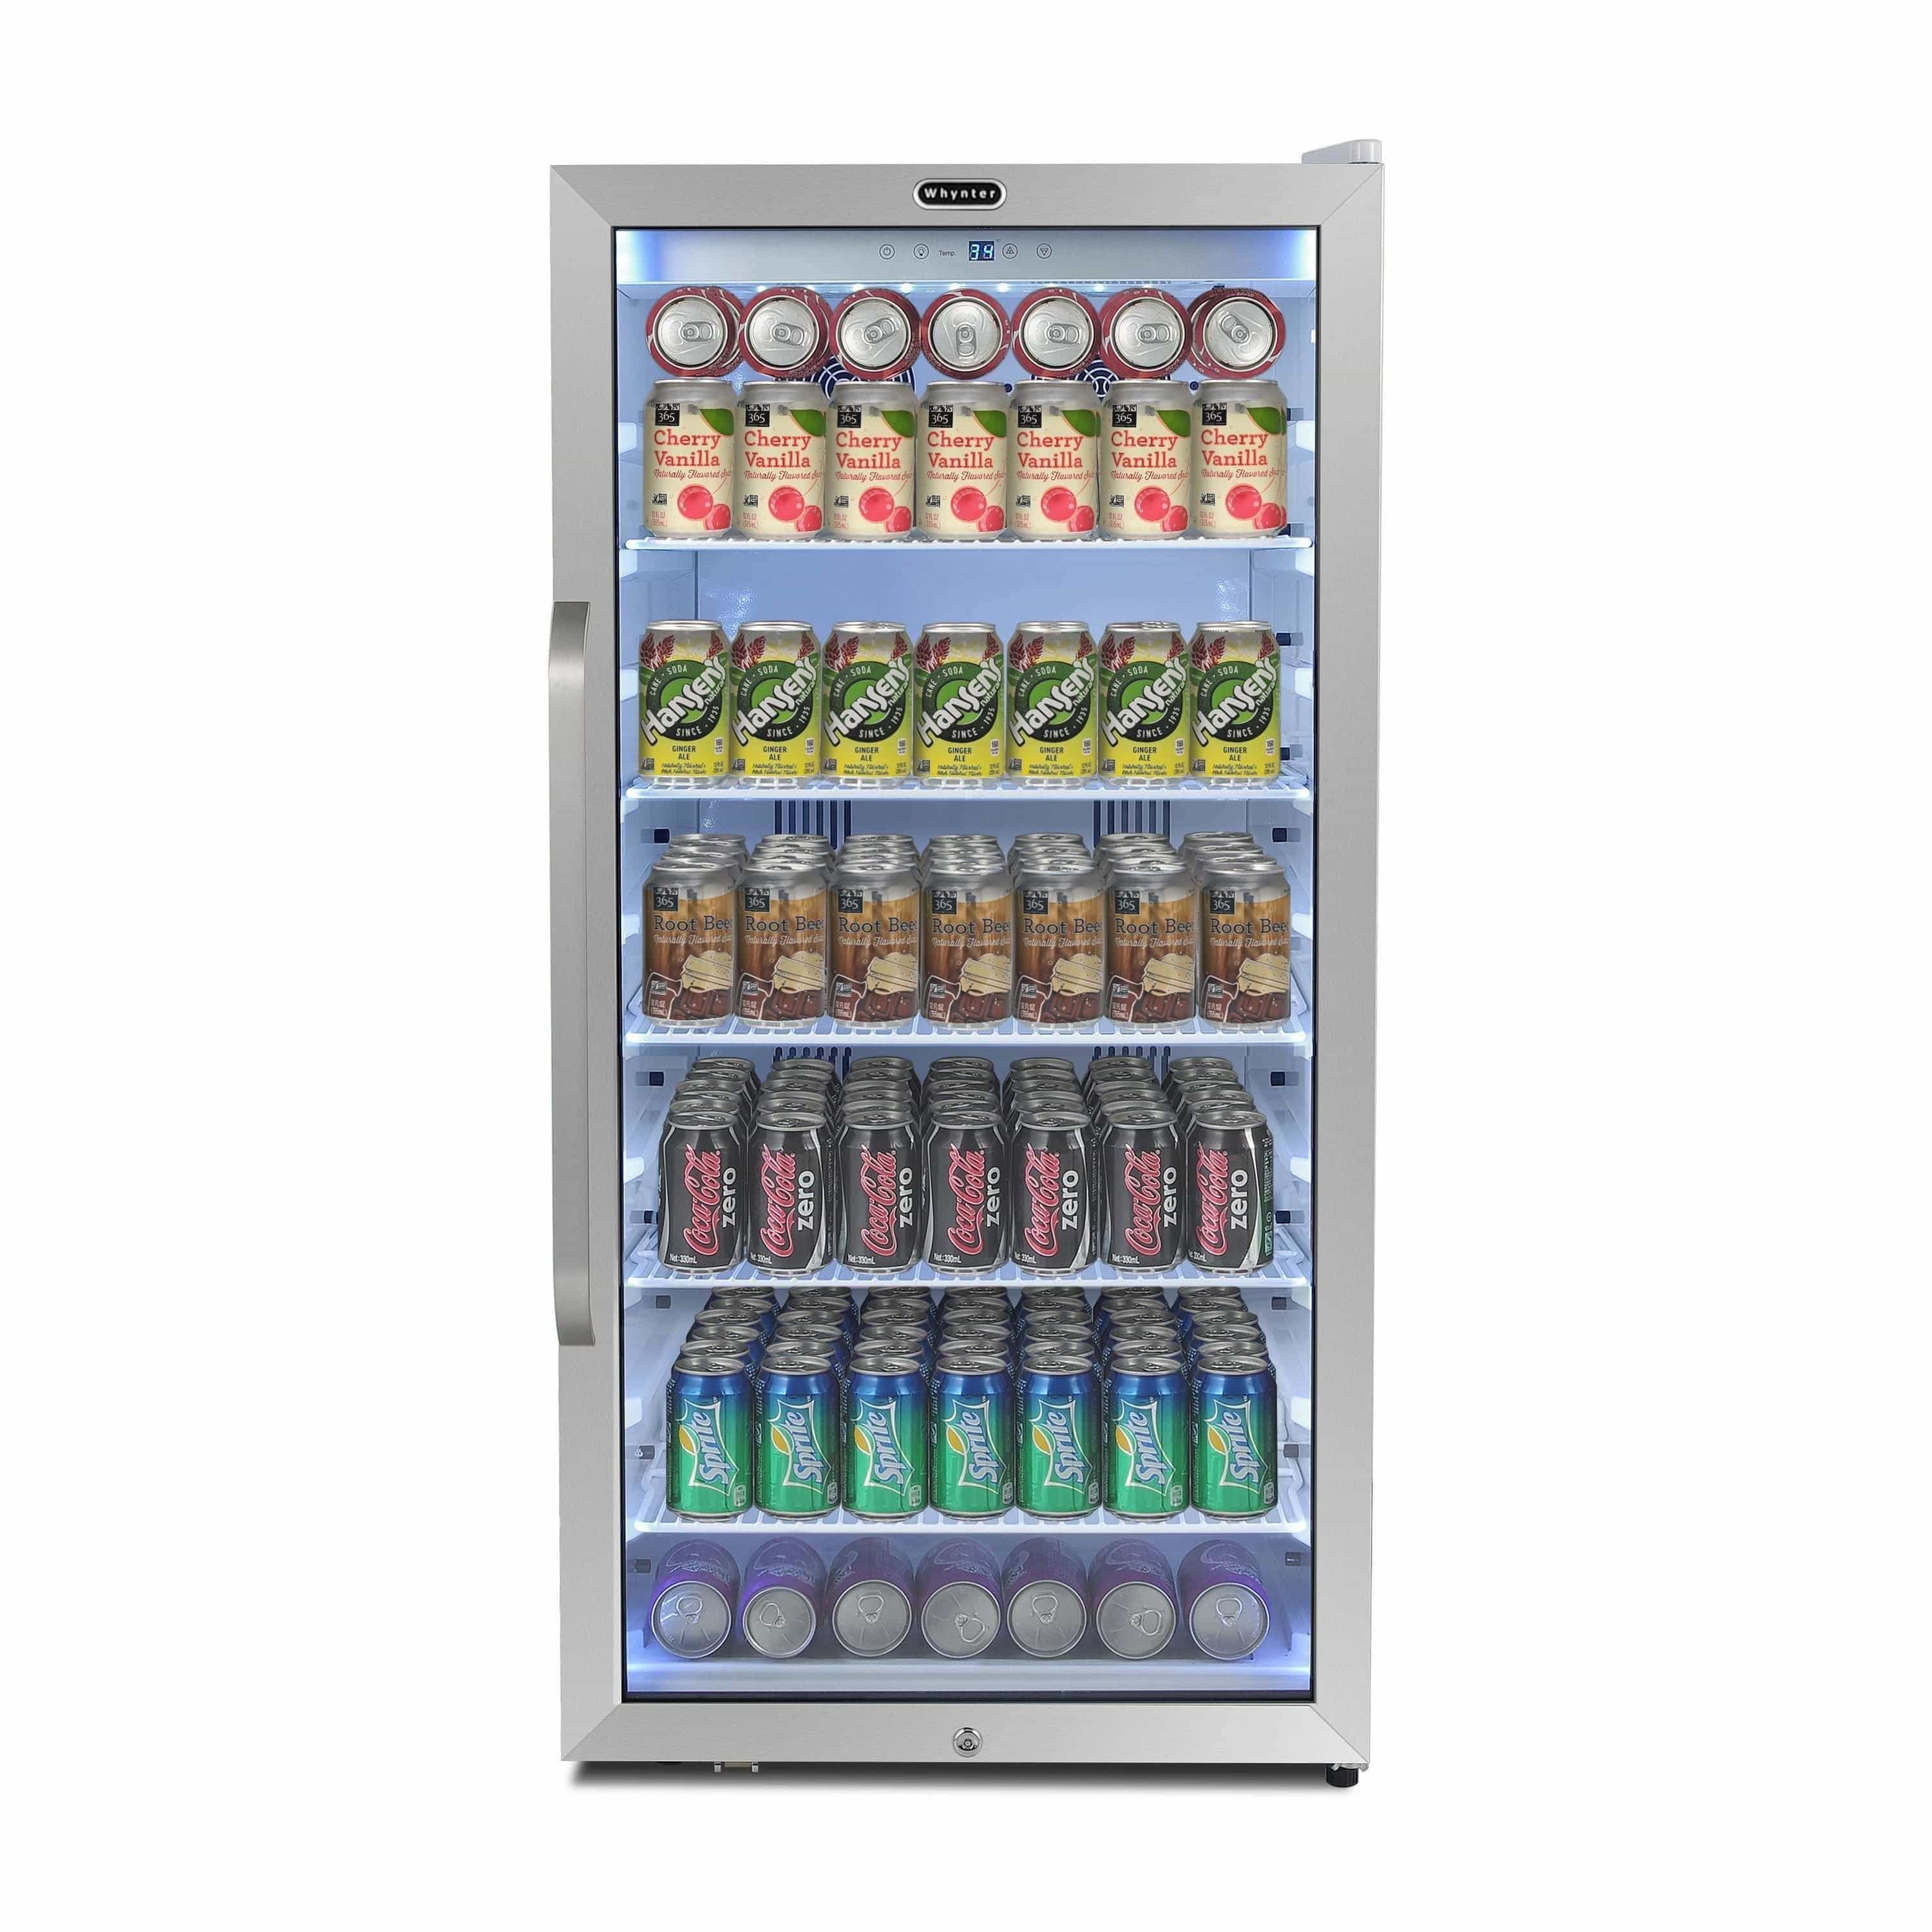 Whynter Freestanding 8.1 cu. ft. Stainless Steel Commercial Beverage Merchandiser Refrigerator with Superlit Door and Lock – White CBM-815WS Wine Coolers Empire